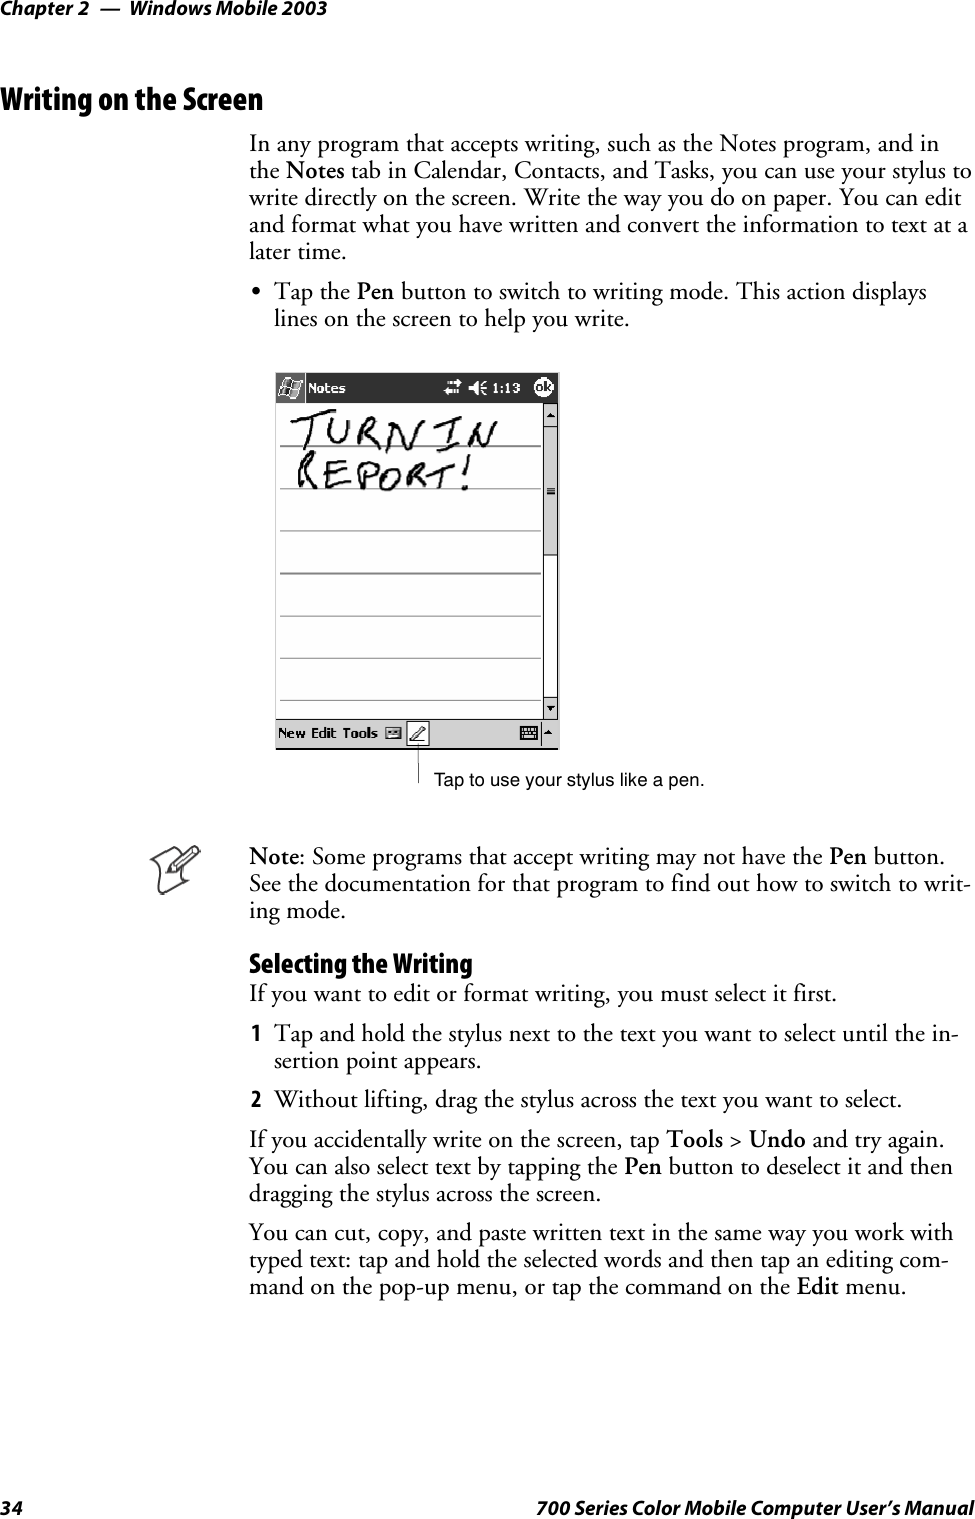 Windows Mobile 2003Chapter —234 700 Series Color Mobile Computer User’s ManualWriting on the ScreenIn any program that accepts writing, such as the Notes program, and inthe Notes tab in Calendar, Contacts, and Tasks, you can use your stylus towrite directly on the screen. Write the way you do on paper. You can editandformatwhatyouhavewrittenandconverttheinformationtotextatalater time.STap the Pen button to switch to writing mode. This action displayslines on the screen to help you write.Tap to use your stylus like a pen.Note: Some programs that accept writing may not have the Pen button.Seethedocumentationforthatprogramtofindouthowtoswitchtowrit-ing mode.Selecting the WritingIfyouwanttoeditorformatwriting,youmustselectitfirst.1Tap and hold the stylus next to the text you want to select until the in-sertion point appears.2Without lifting, drag the stylus across the text you want to select.If you accidentally write on the screen, tap Tools &gt;Undo and try again.You can also select text by tapping the Pen button to deselect it and thendragging the stylus across the screen.You can cut, copy, and paste written text in the same way you work withtyped text: tap and hold the selected words and then tap an editing com-mand on the pop-up menu, or tap the command on the Edit menu.